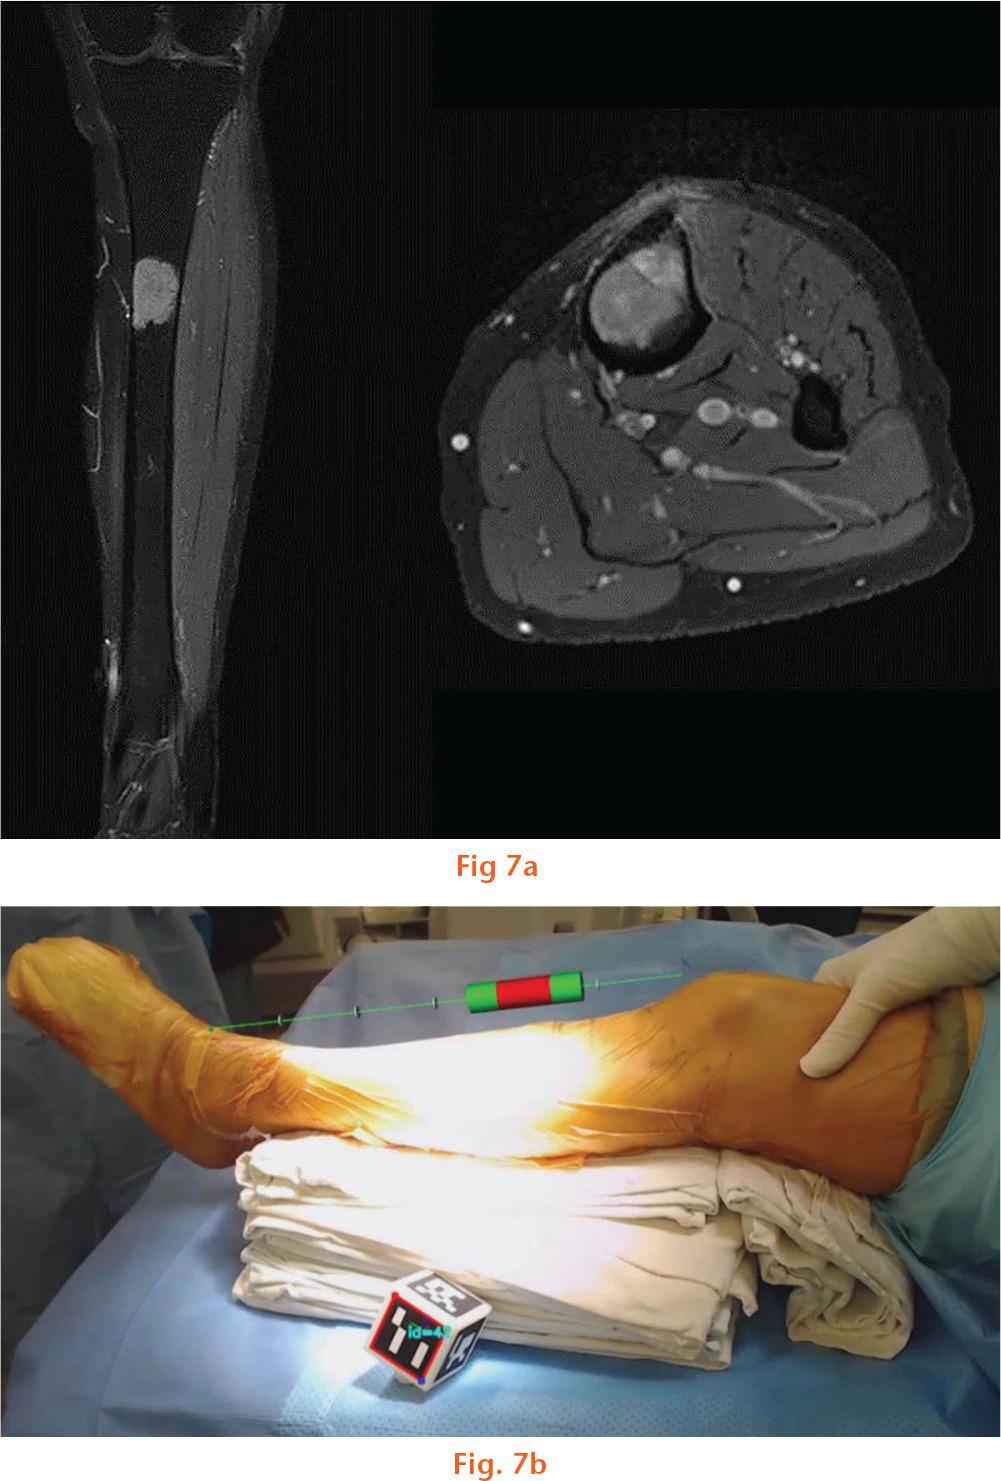  
          Images showing: a) intercalary resection was planned based on MR images and b) how the osteotomies were monitored under augmented reality based navigation guidance.
        